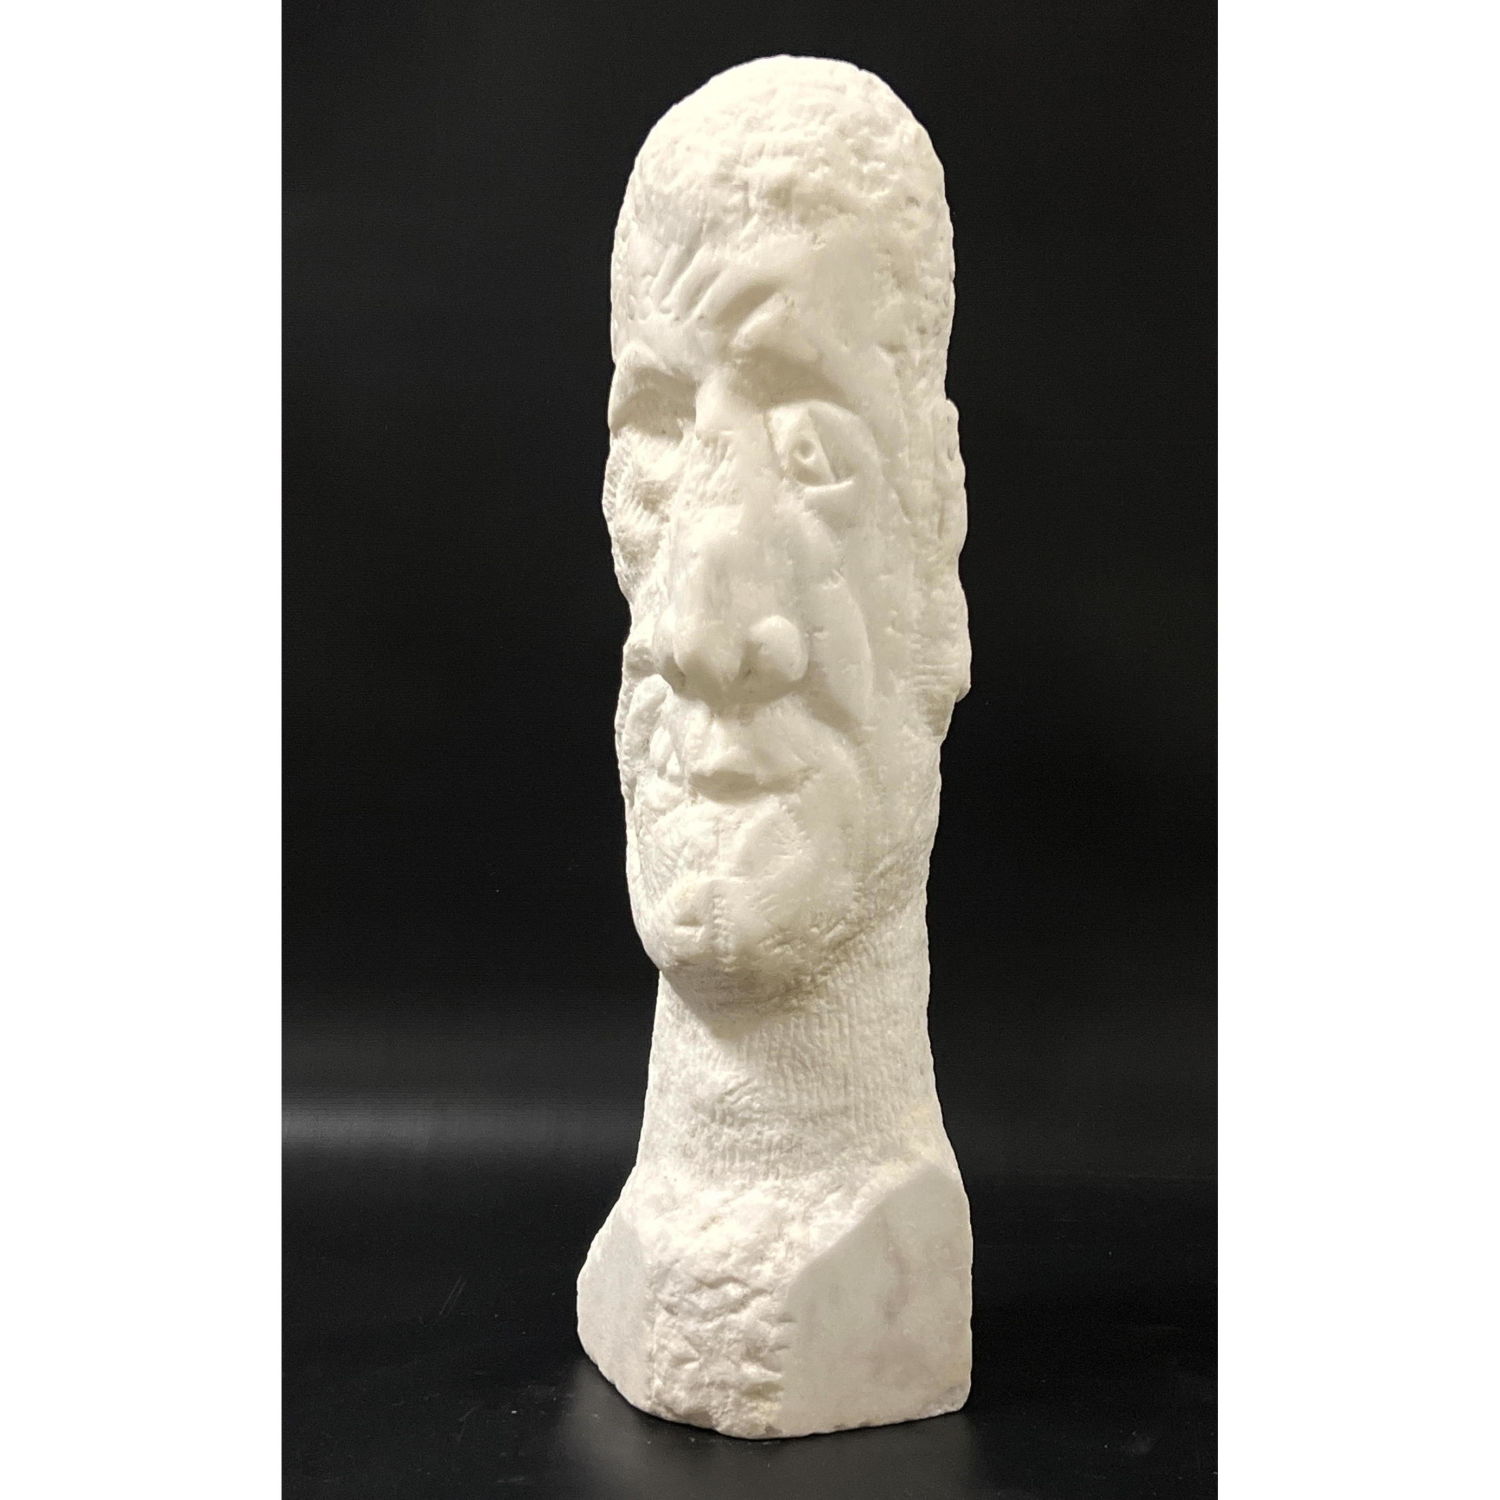 Carved Marble Portrait Bust. Elongated